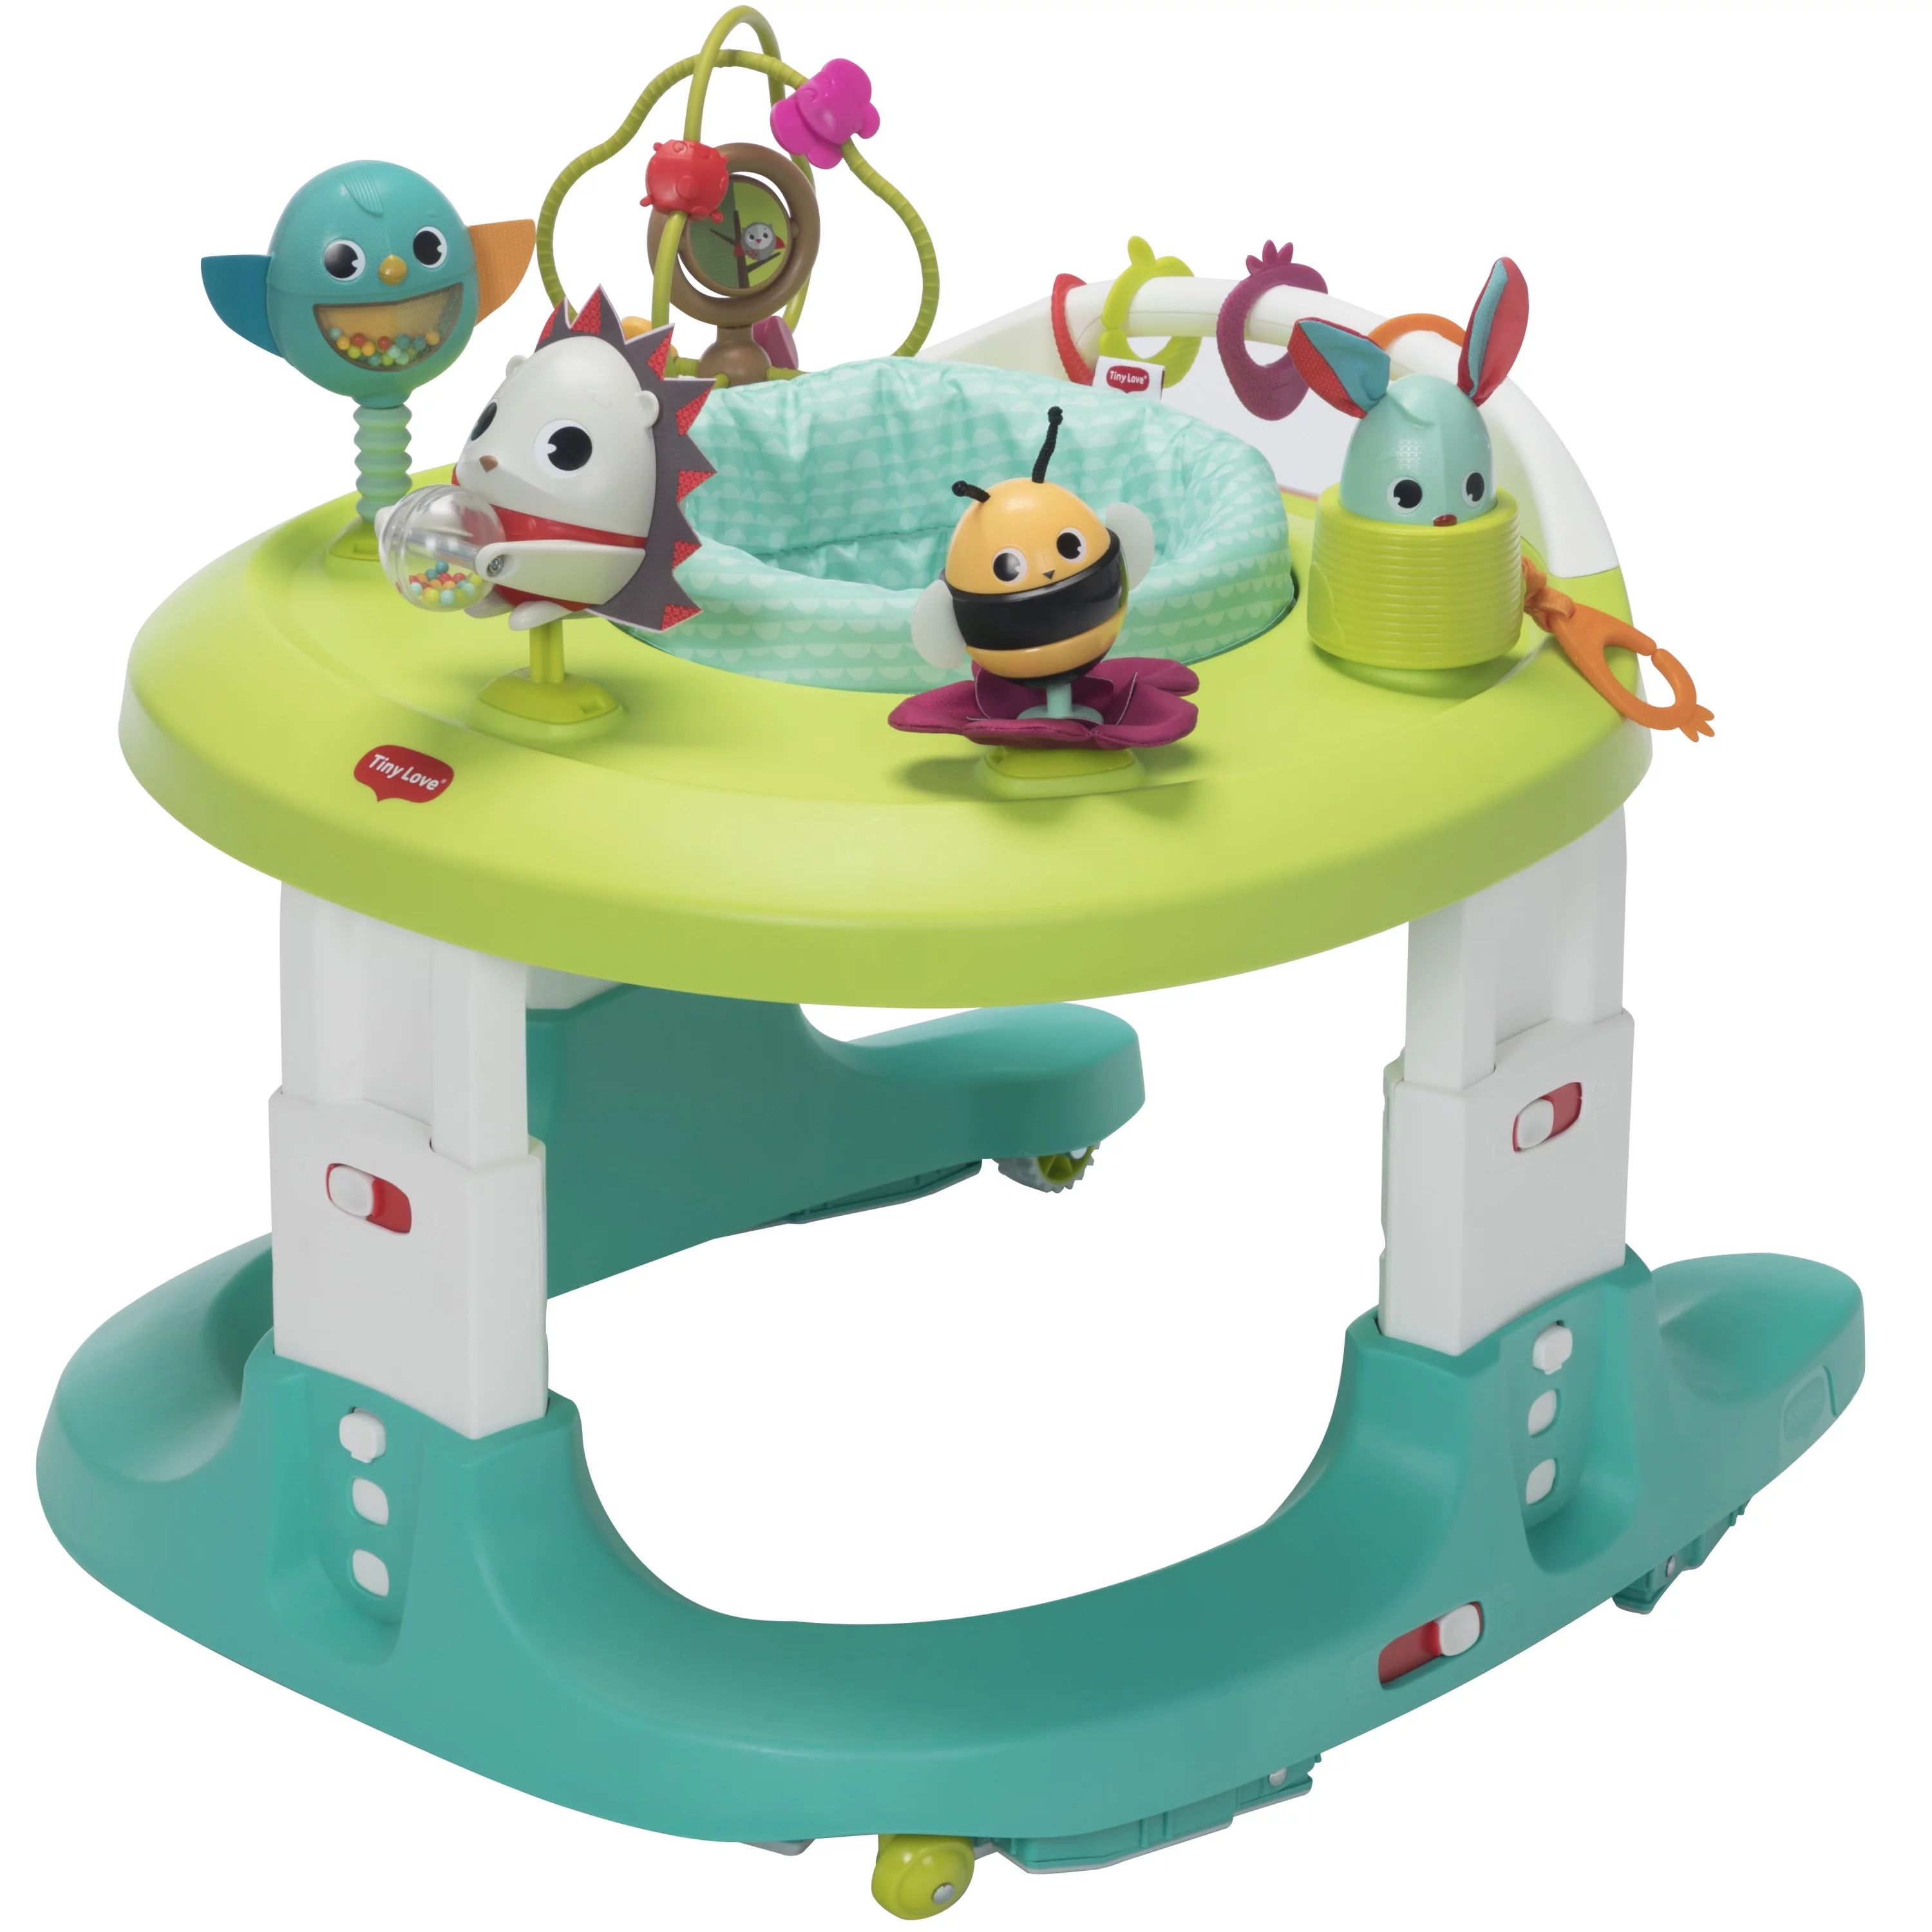 Tiny Love 4-in-1 Here I Grow Mobile Activity Center, Meadow Days | Walmart (US)